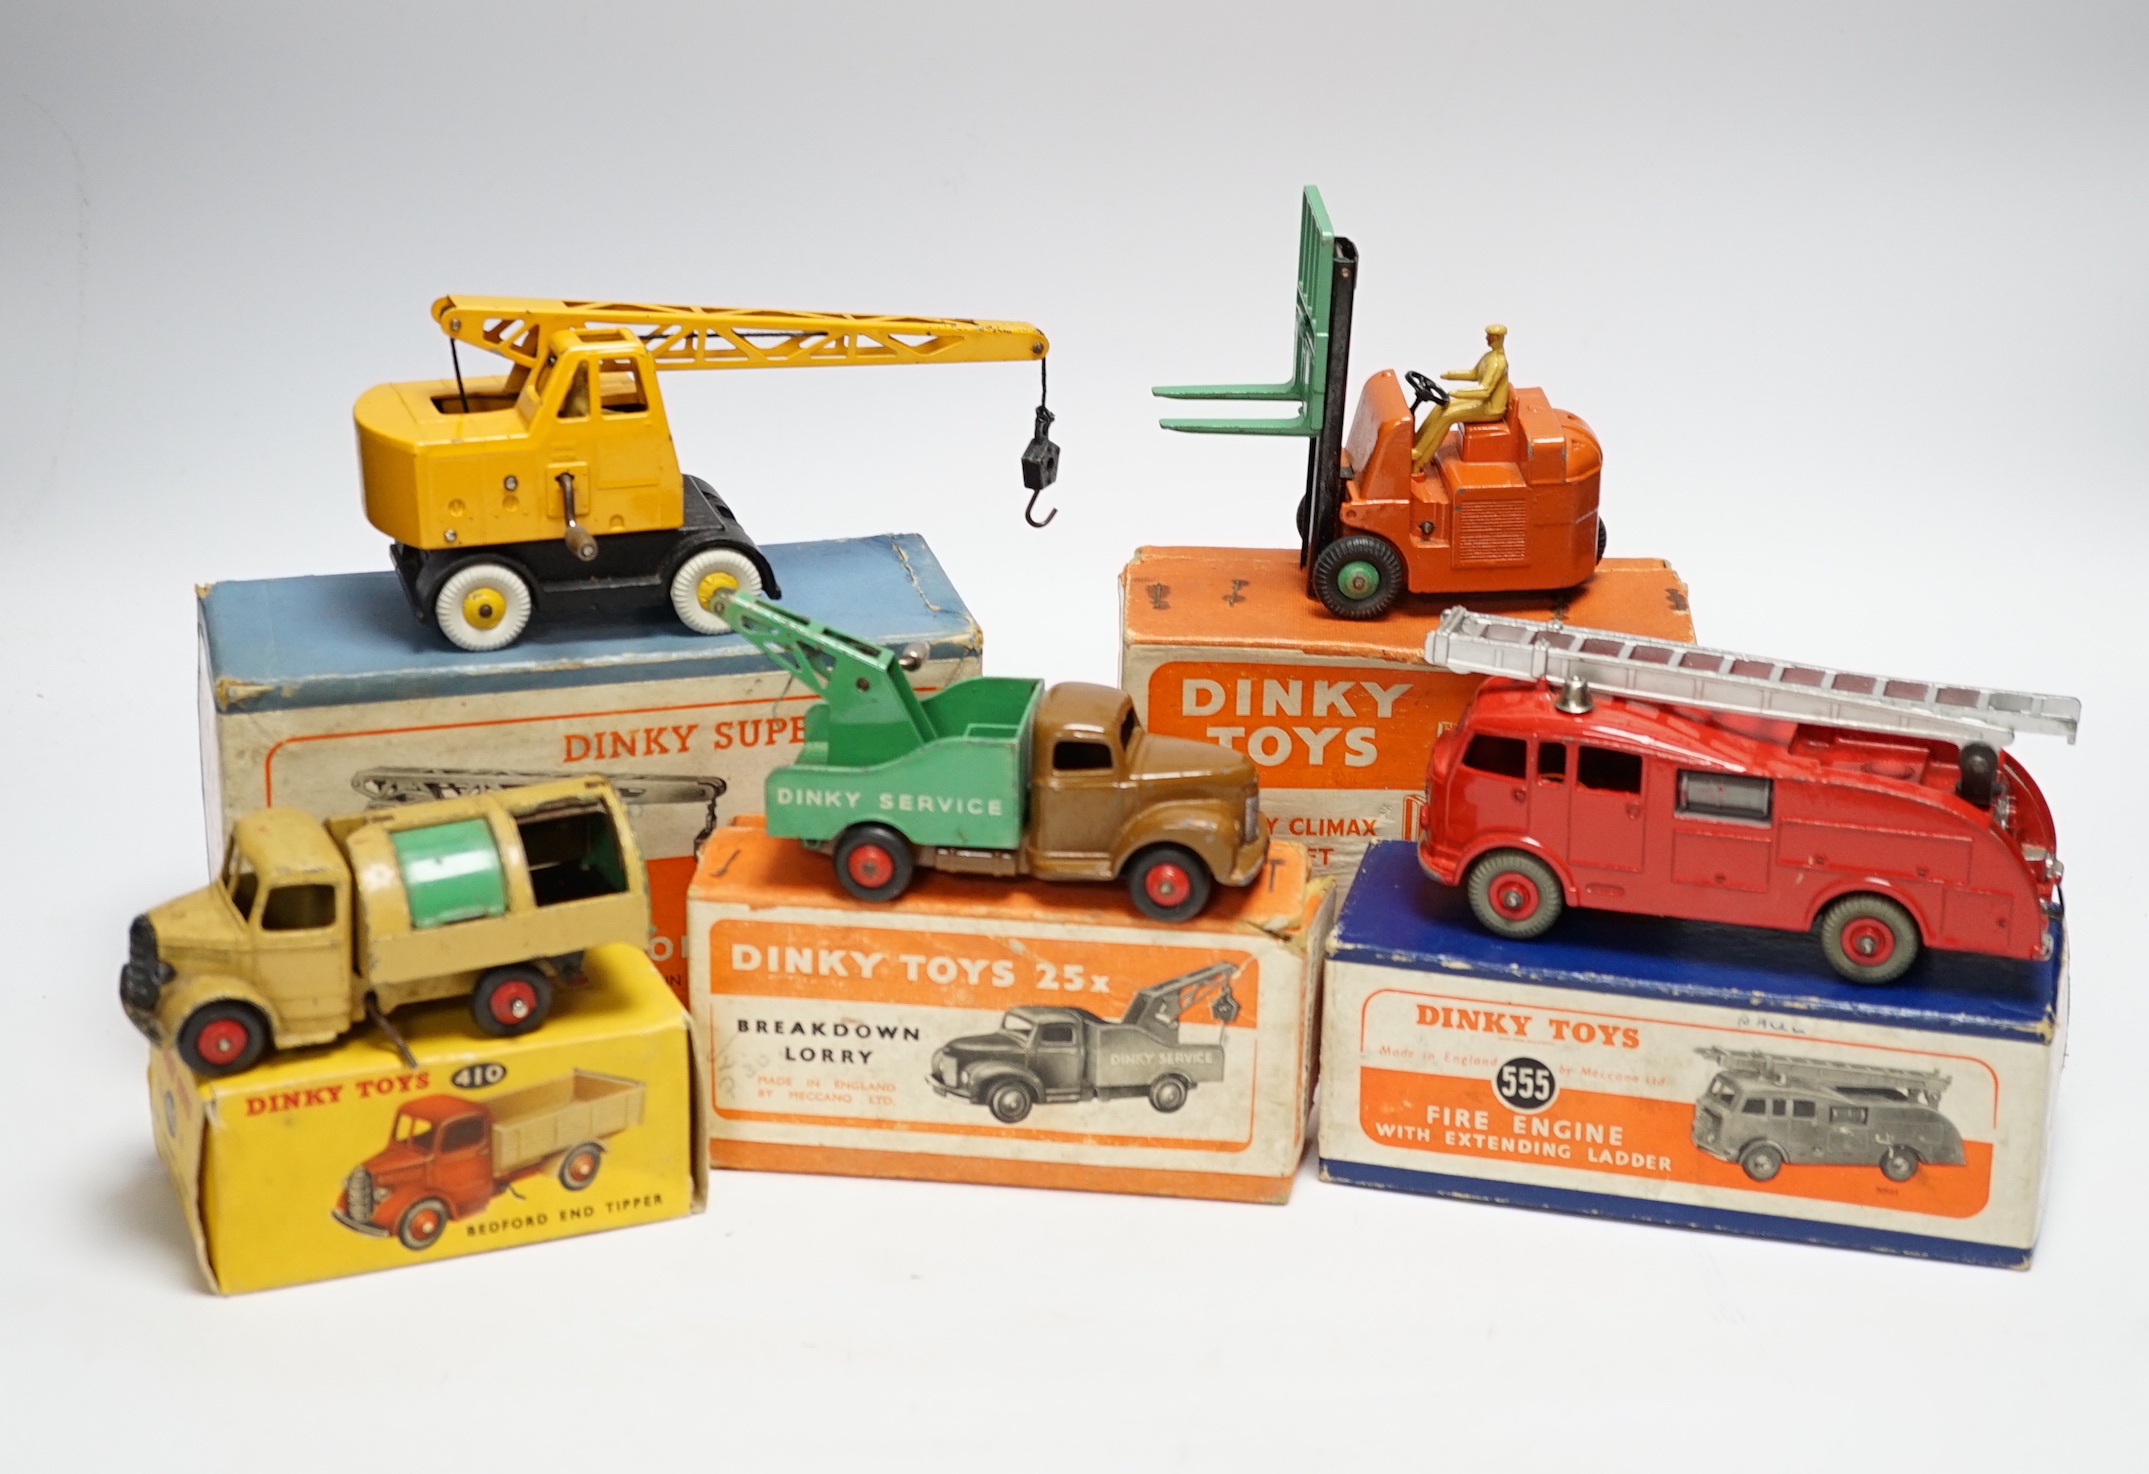 Five boxed dinky toys including (25x) breakdown lorry, (410) Bedford End Tipper, (555) Fire Engine, (571) Coles Mobile Crane, and (14c) Coventry Climax Fork Lift Truck